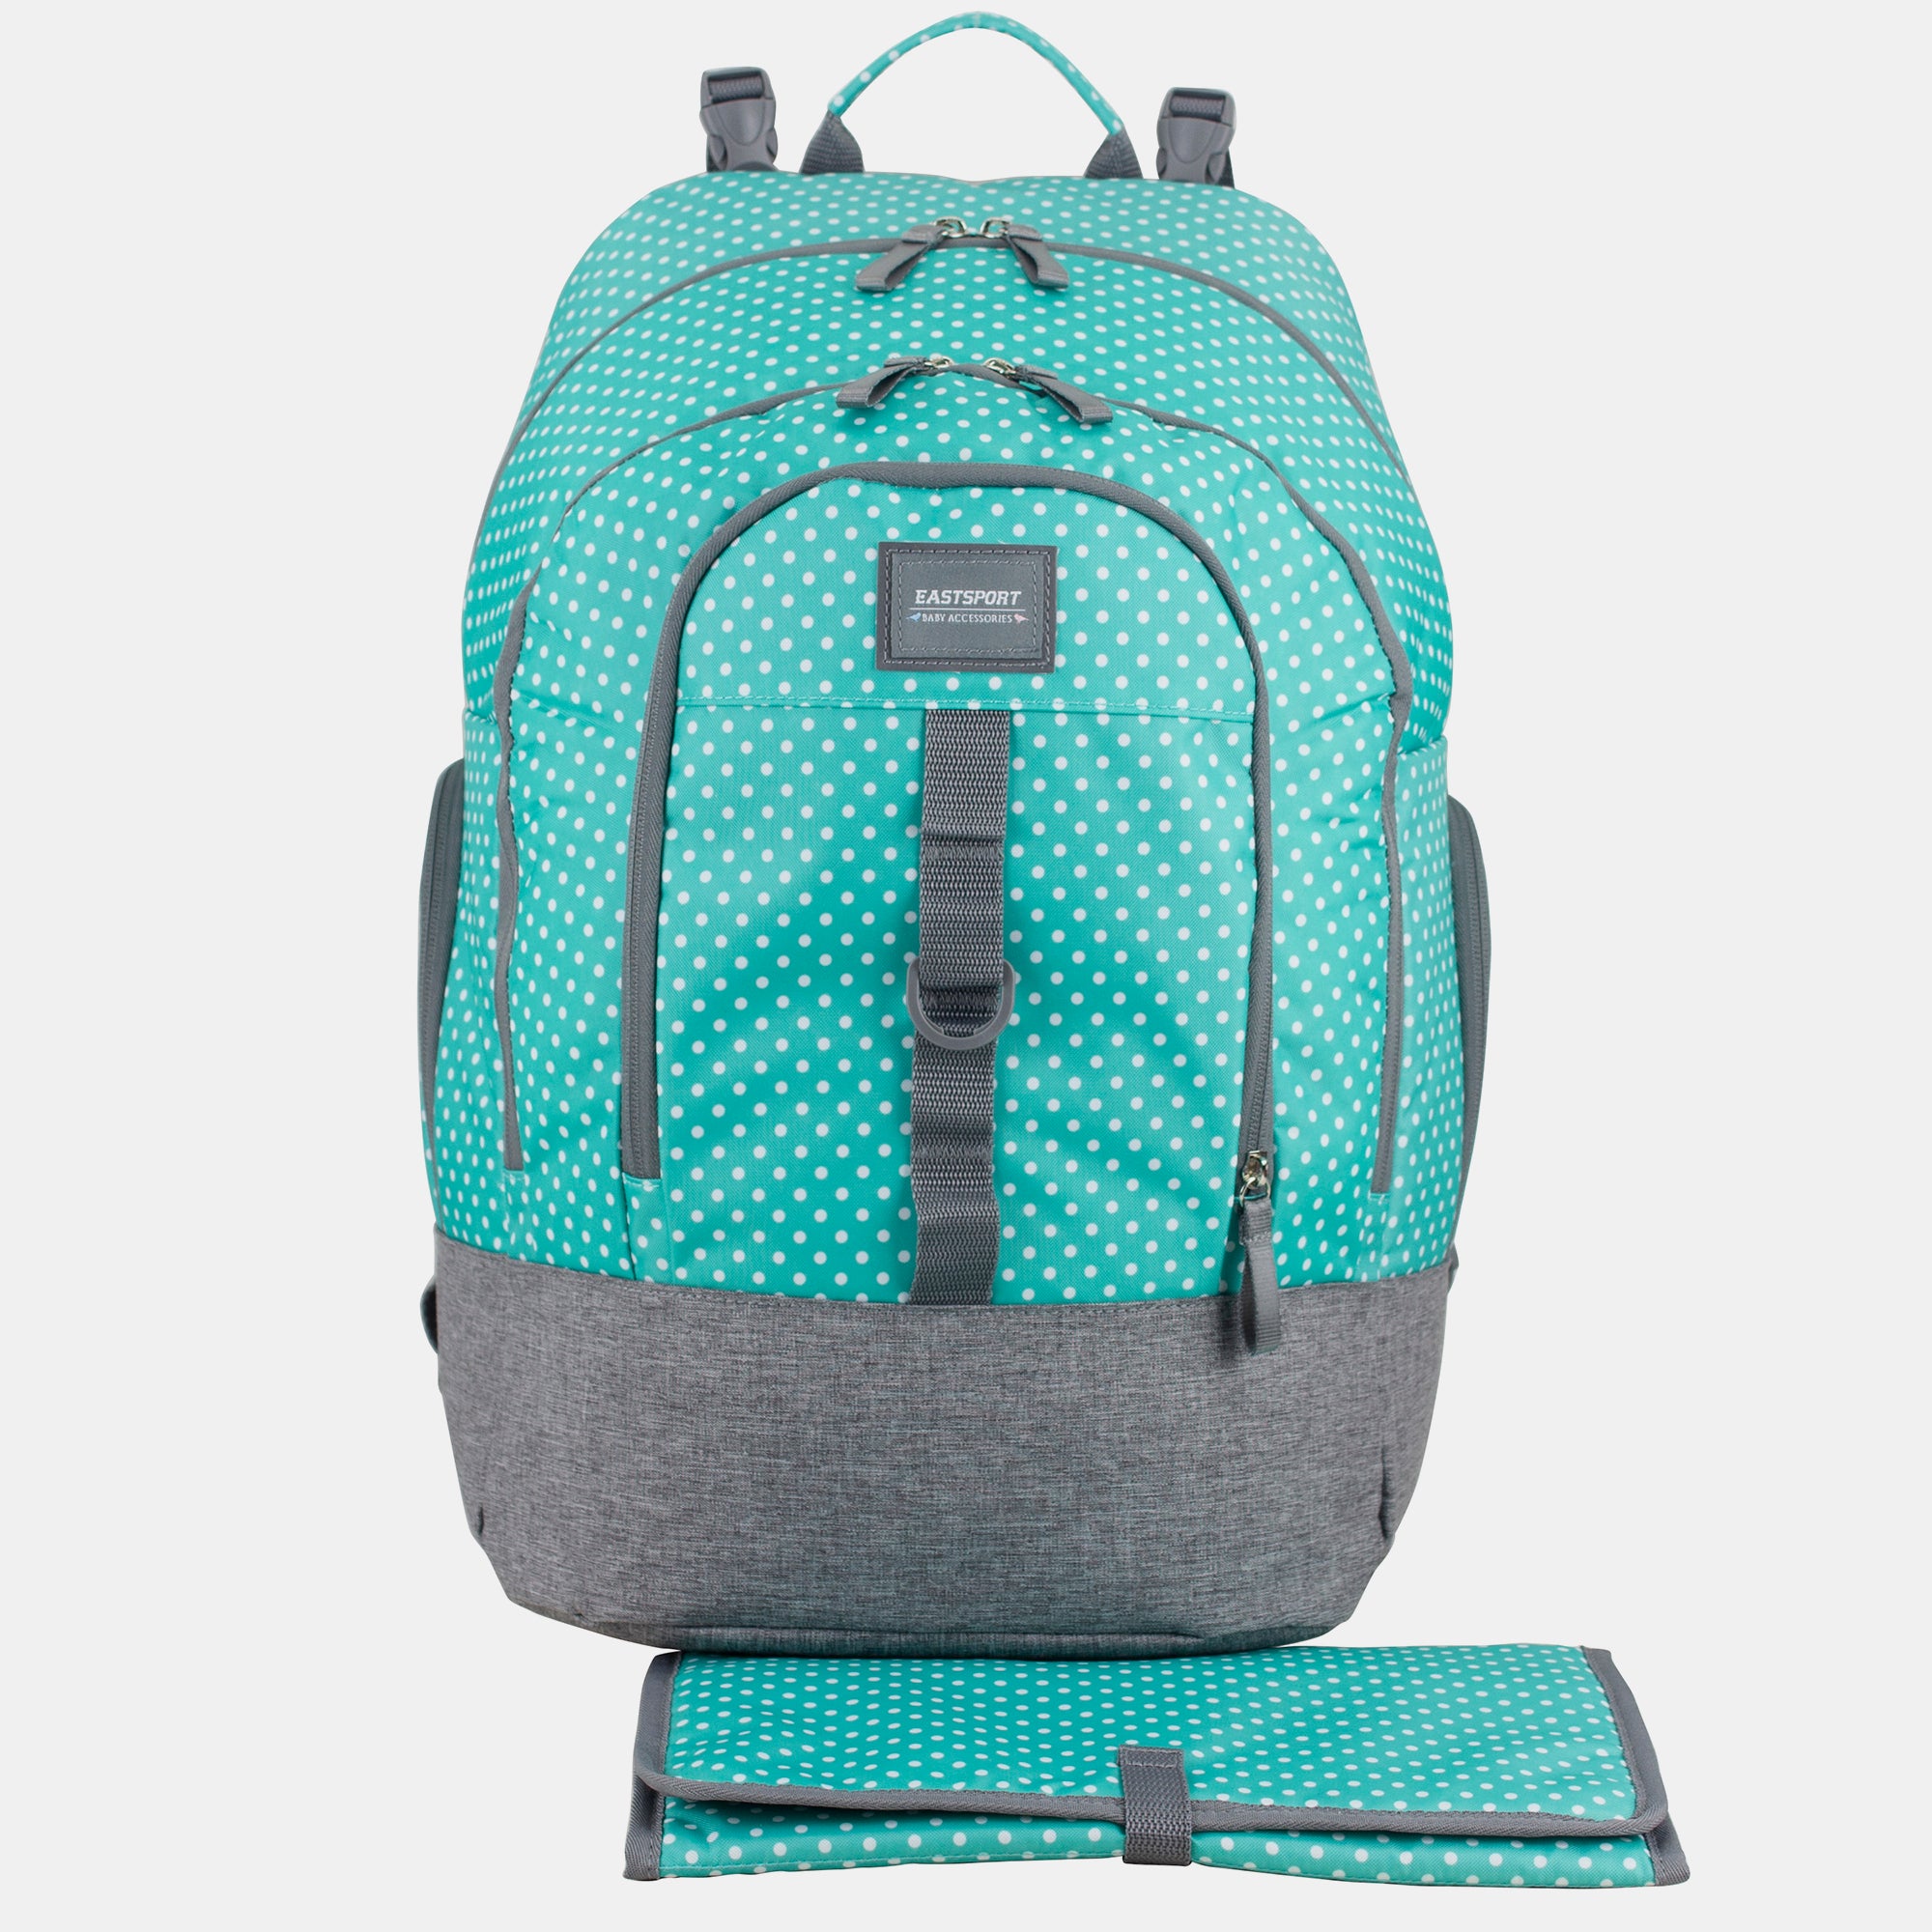 Eastsport Madison Diaper Backpack with Bonus Changing Pad, Turquoise